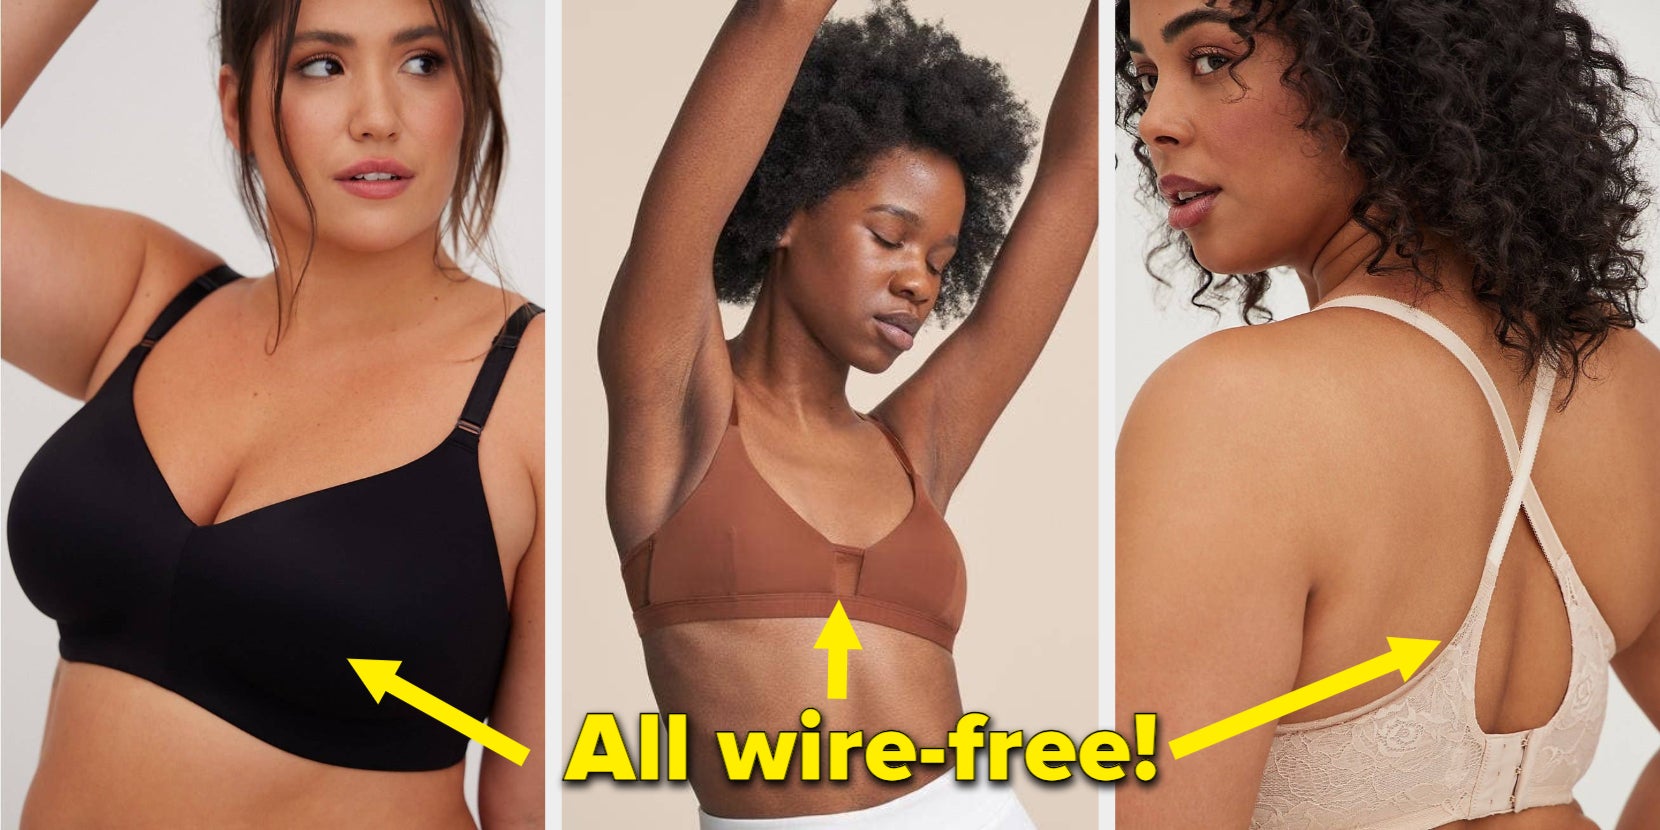 The NEW V-Neck Evolution Bra from Knixwear, Reviews: “The bra reinvented”-  Huffington Post “An undergarment masterpiece” - Bustle “A product that will  change your life” - Women's Health